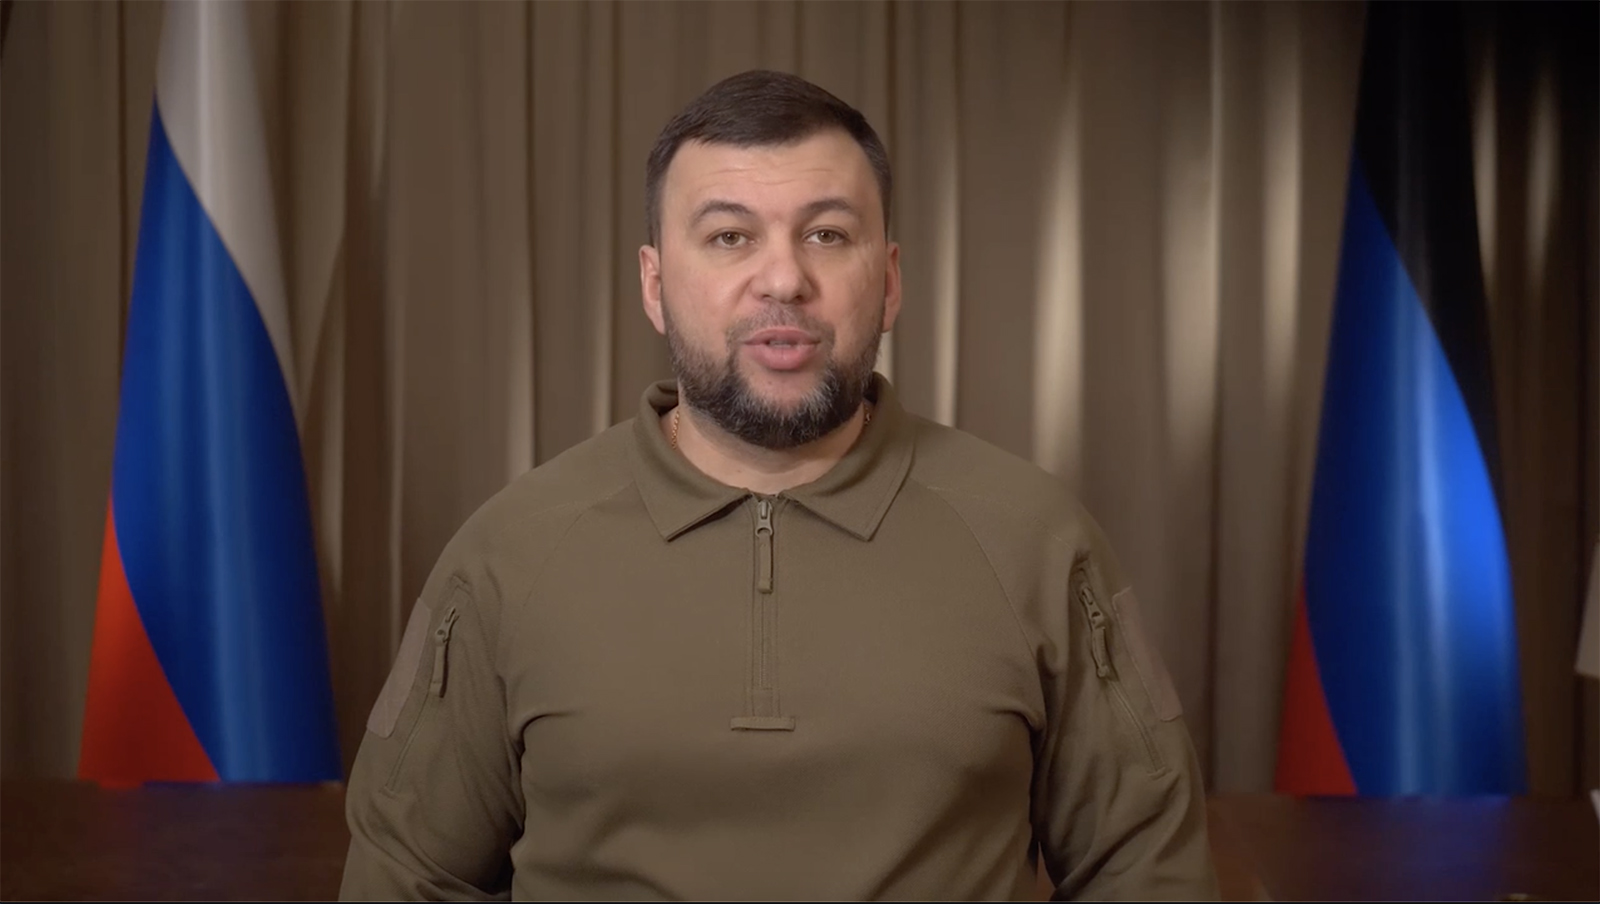 The leader of the breakaway Donetsk region in eastern Ukraine, Denis Pushilin, ordered a general mobilization in a video message posted on Friday.